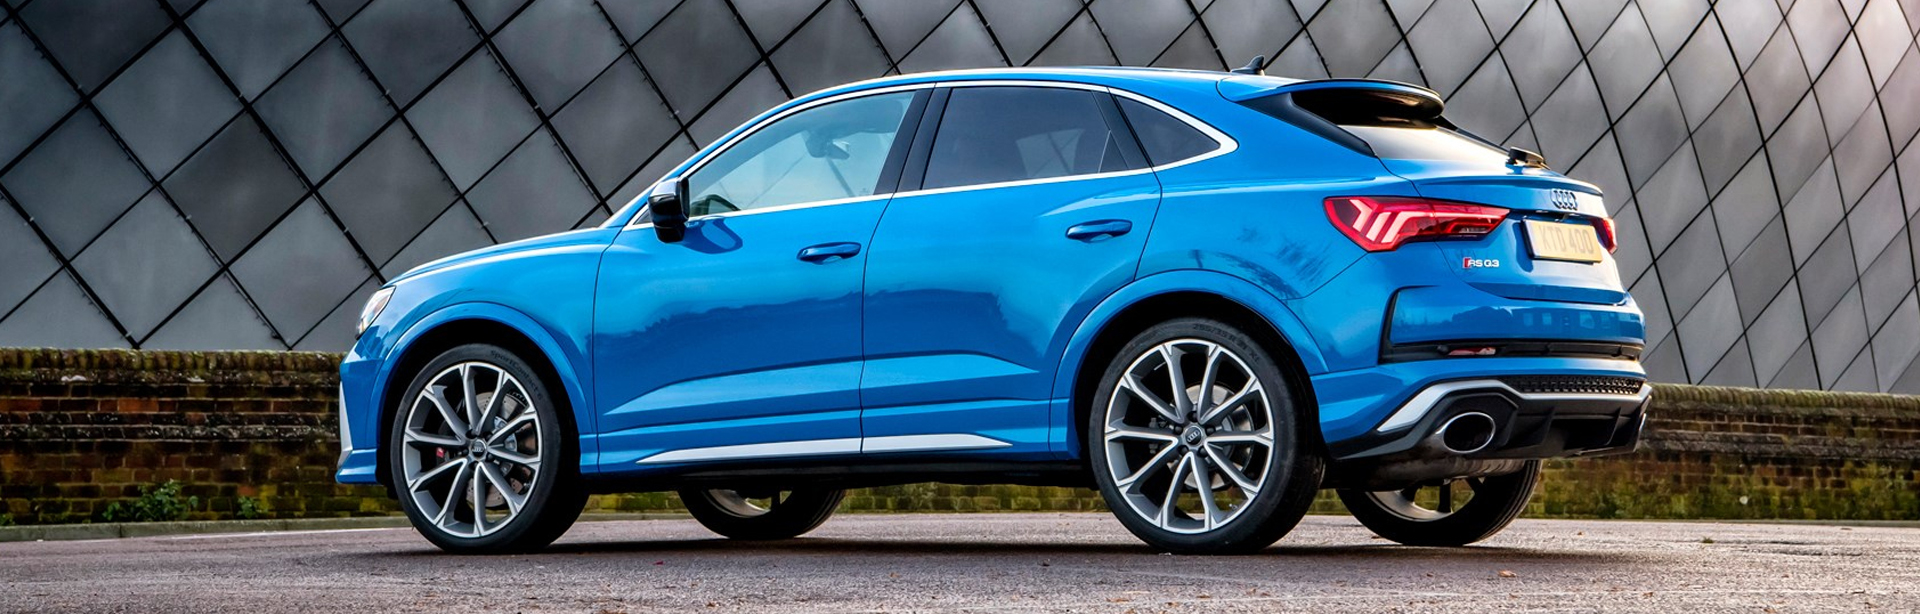 See the New Audi Q3 in Upper Saddle River, NJ | Features Review